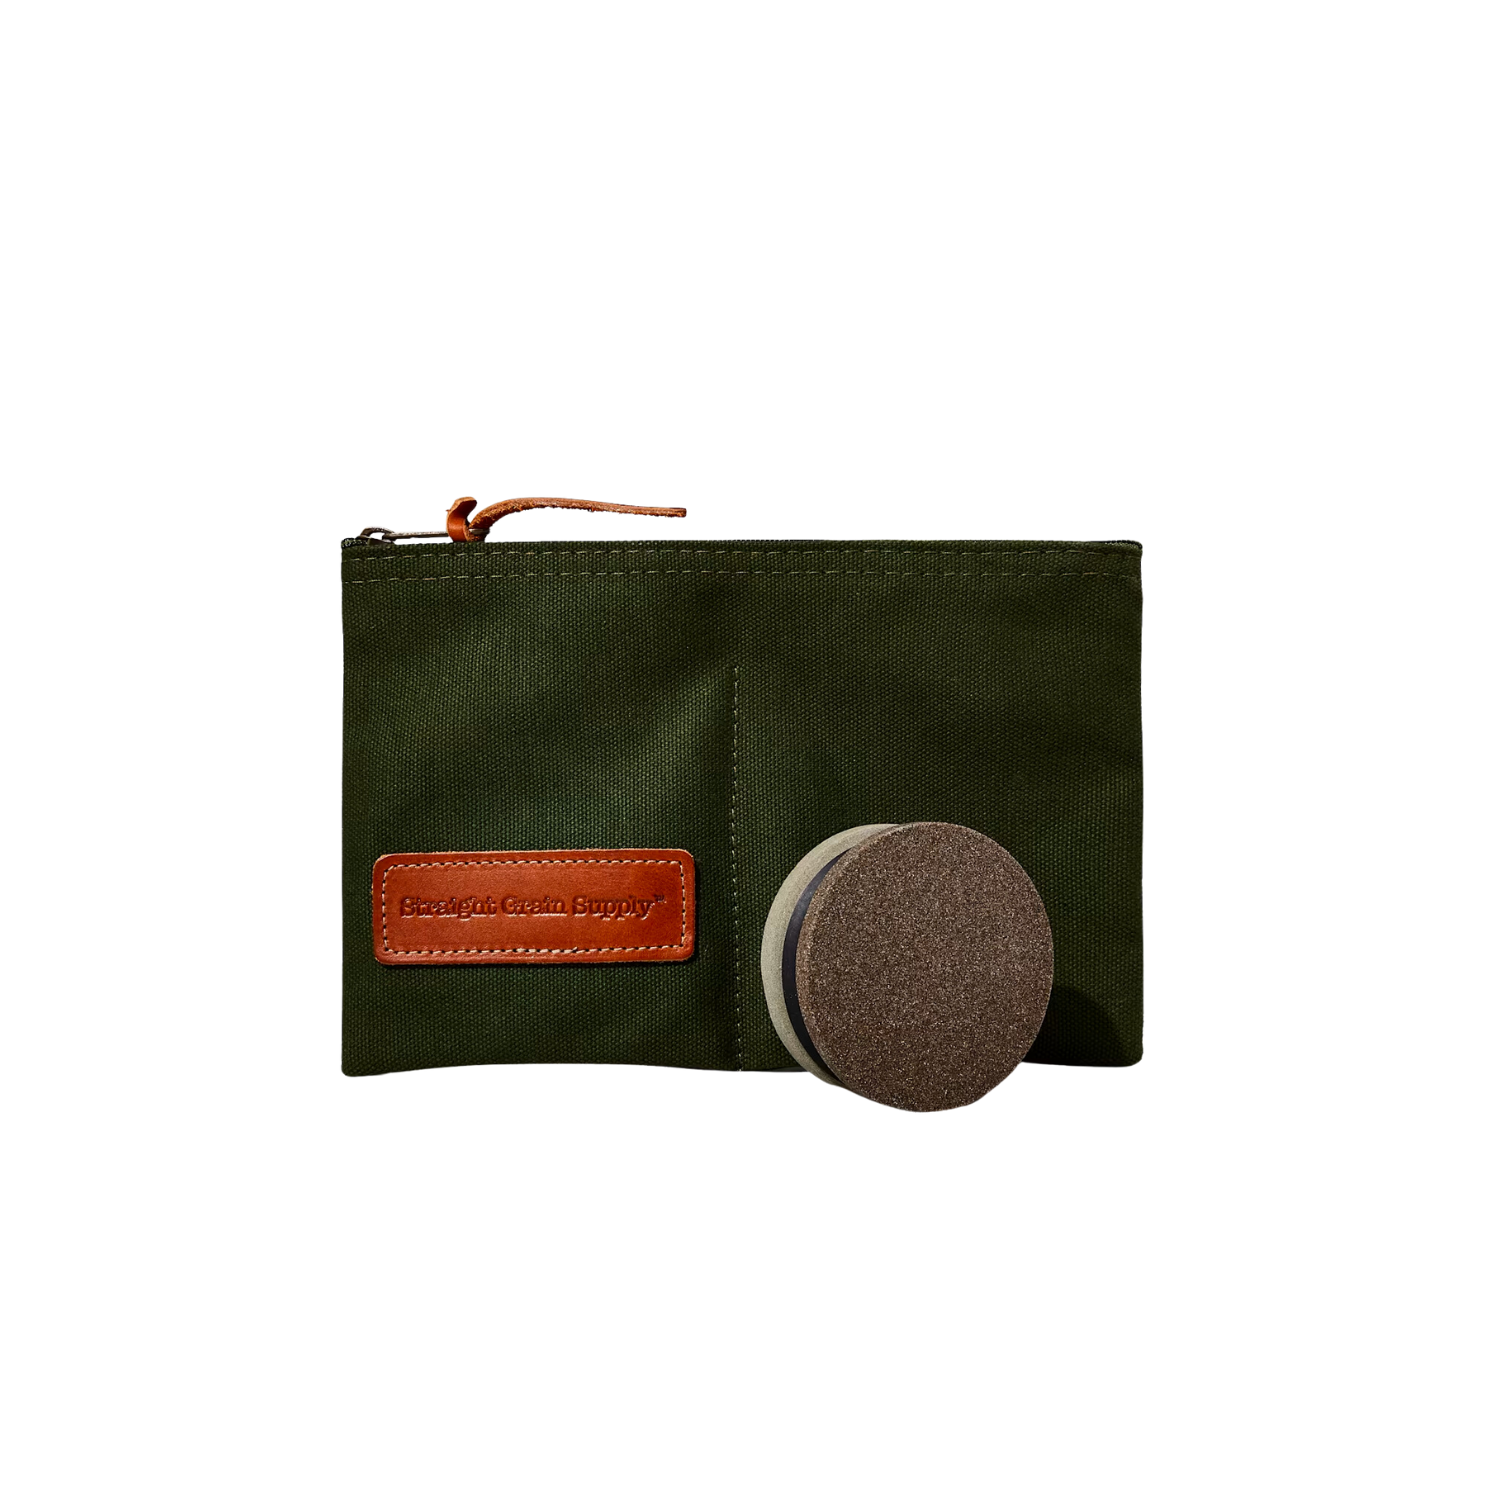 Straight Grain Sharpening Puck and Pouch